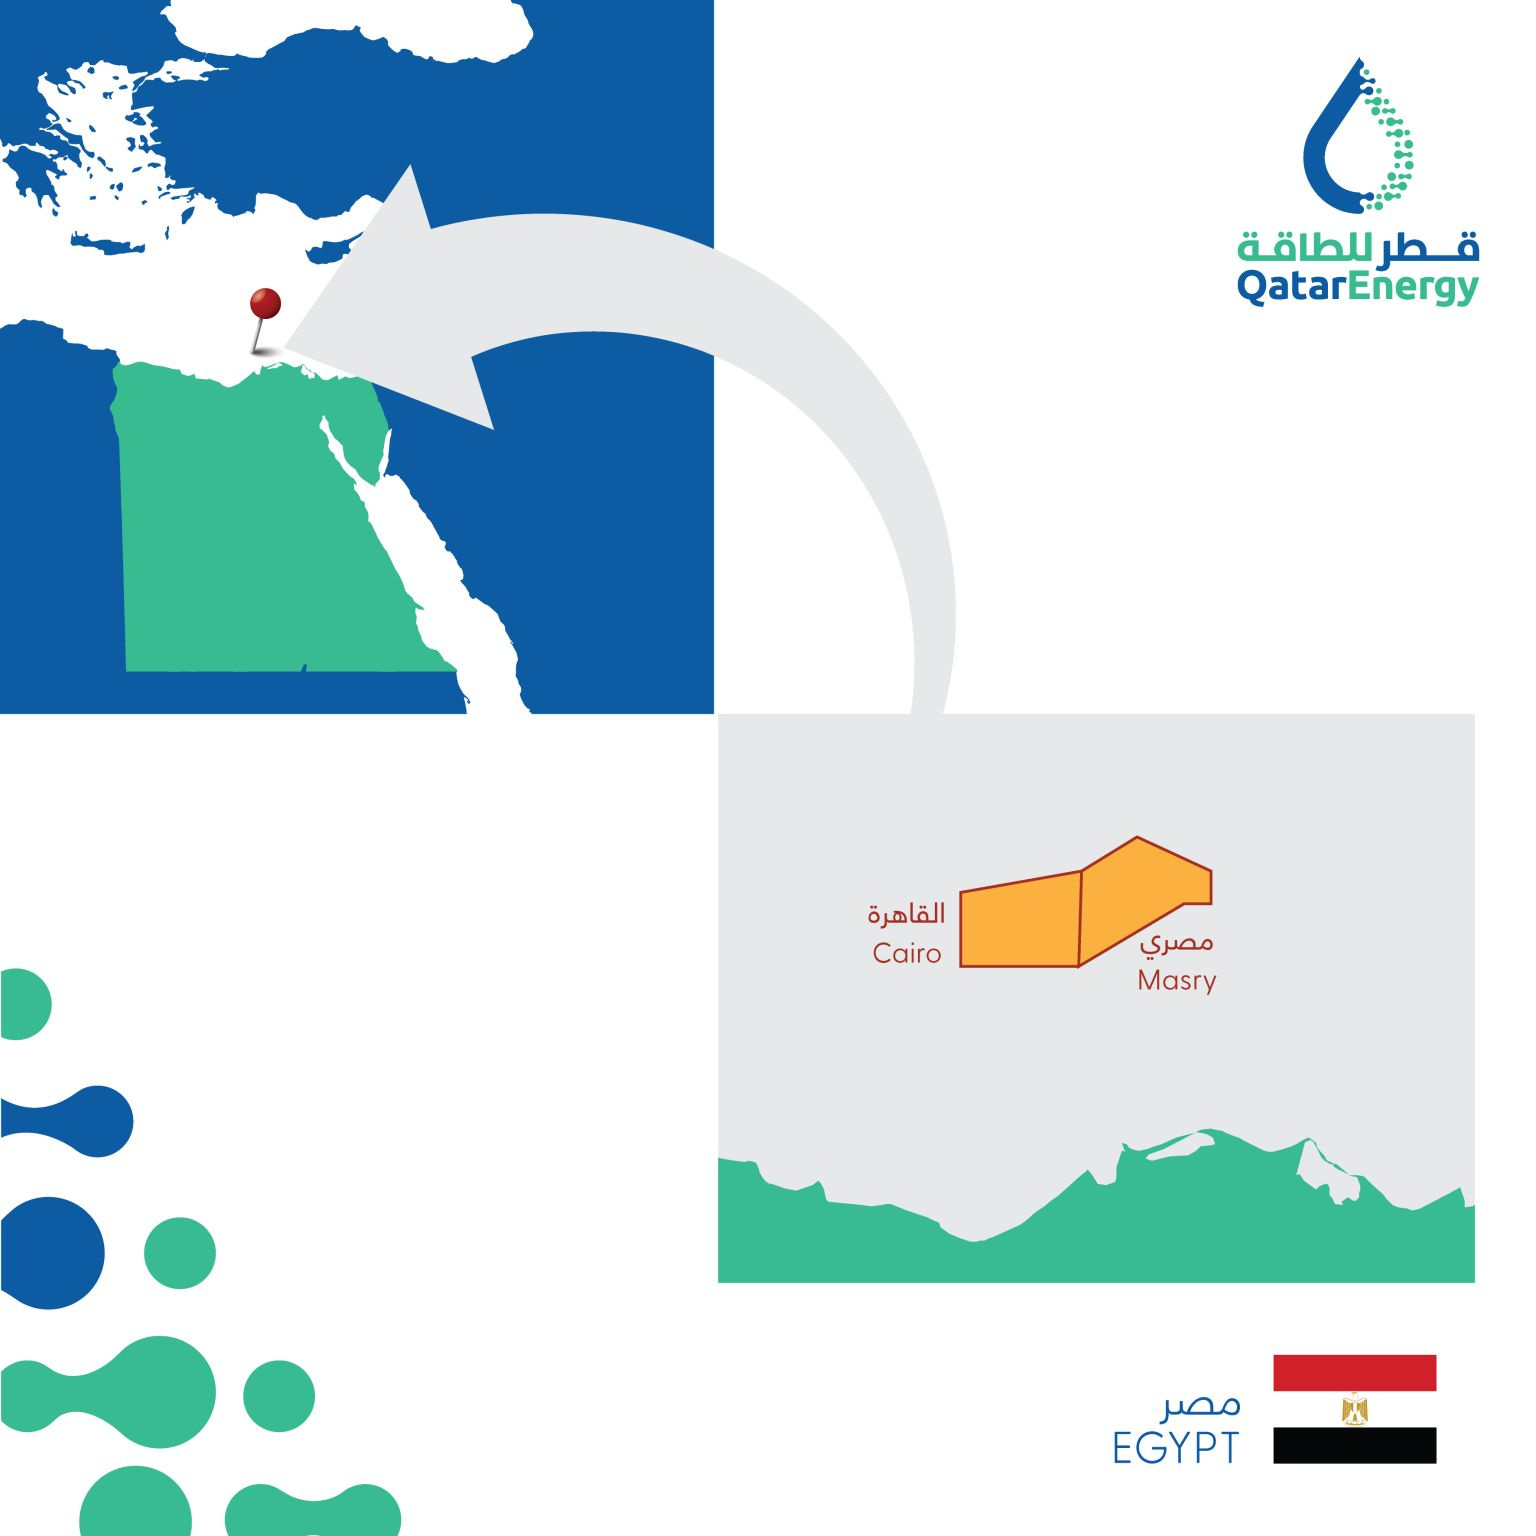 Map showing two exploration blocks in Egypt; Source: QatarEnergy